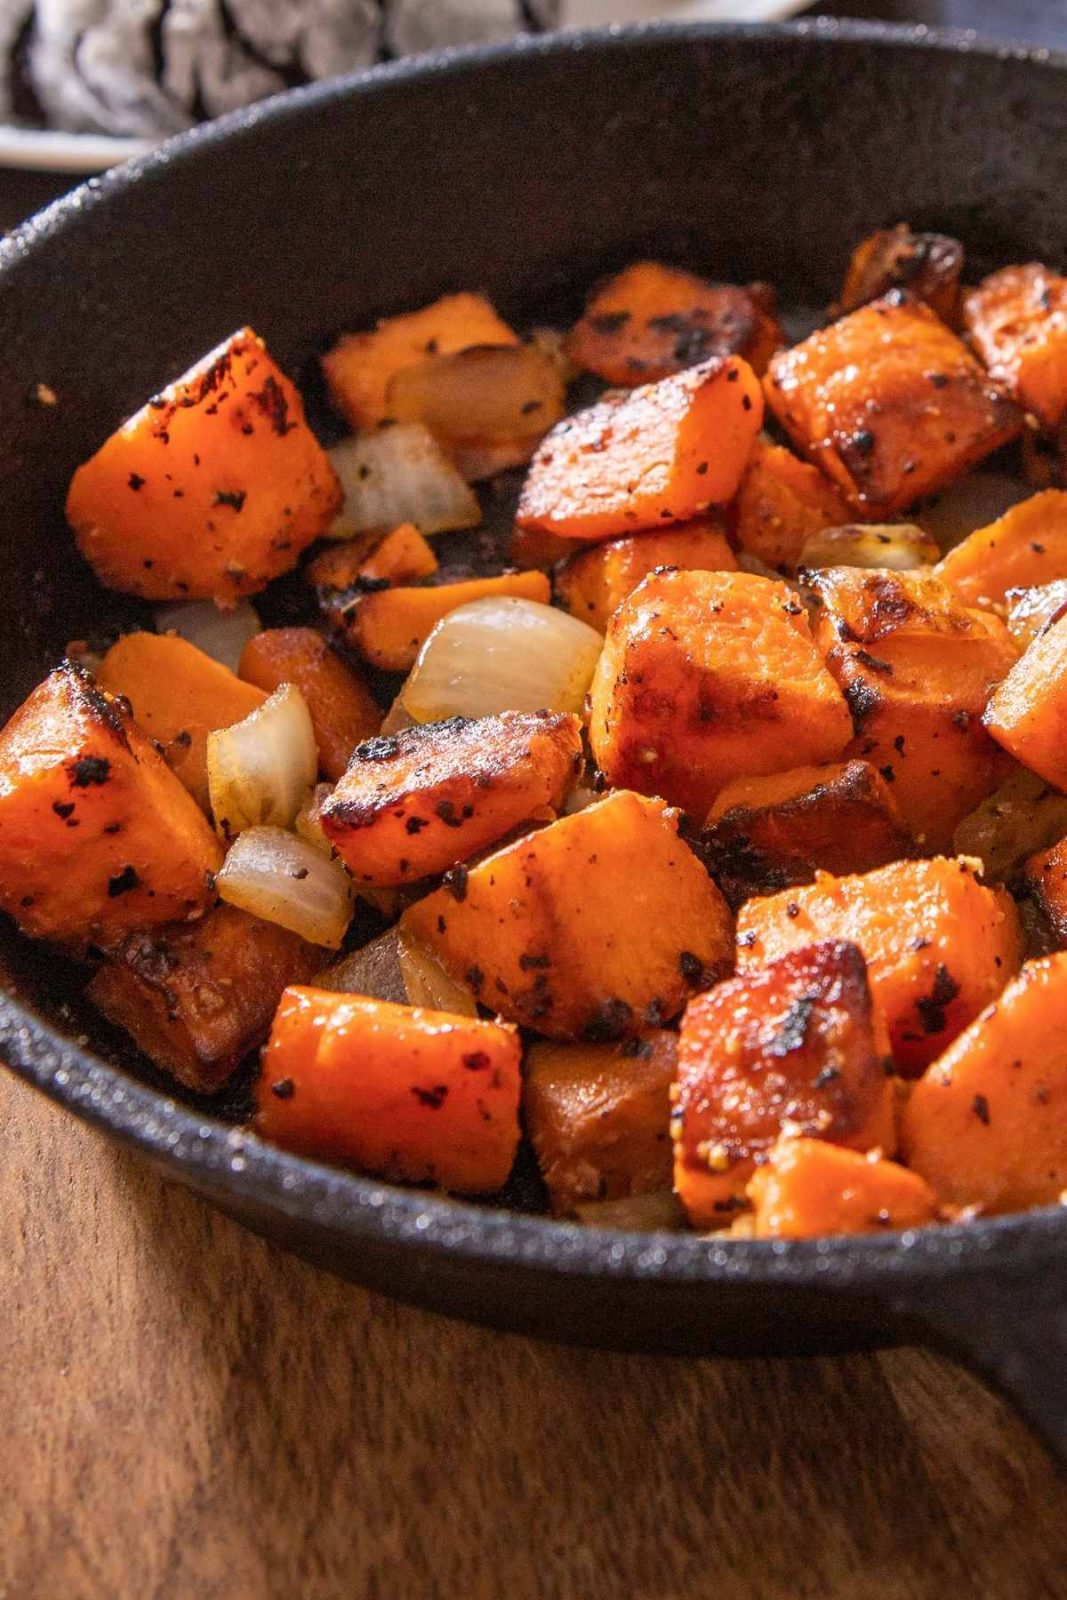 Start your day with a tasty and moreish helping of sweet potato hash breakfast! With just a few ingredients and a skillet, you can create this satisfying and delicious meal in only 30 minutes.